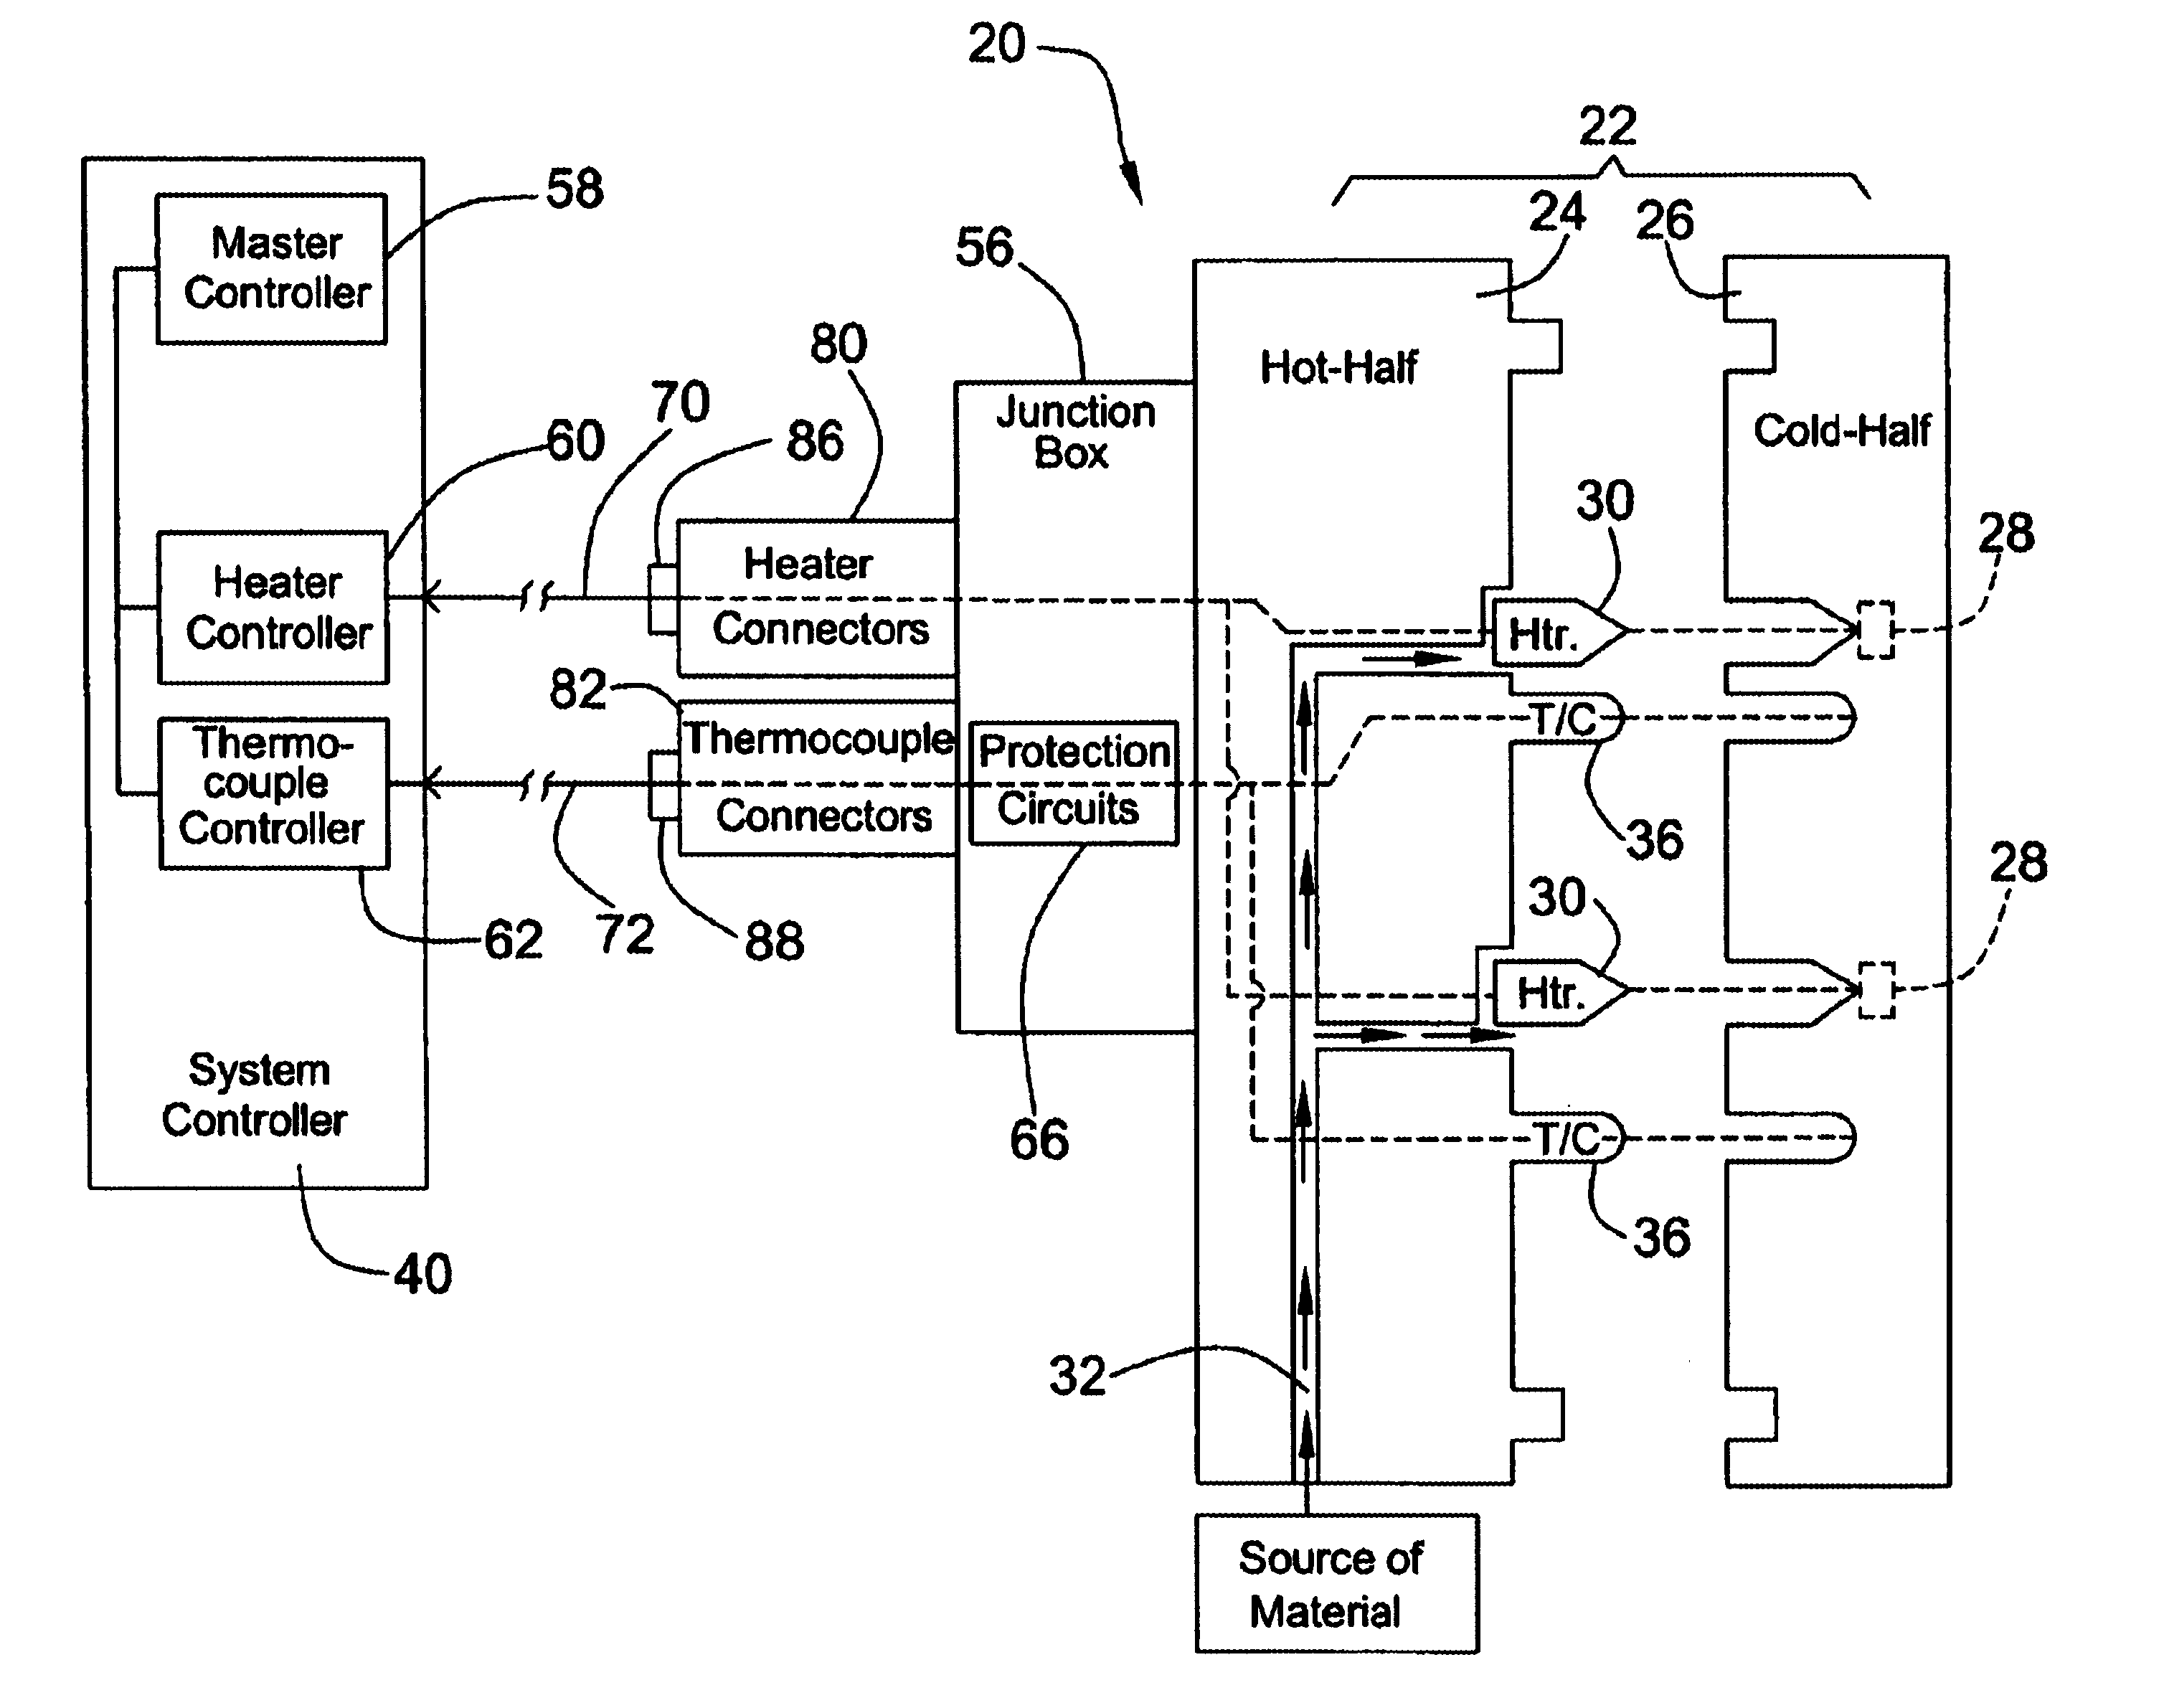 Apparatus for protecting thermocouple circuits in thermoplastic injection moulding equipment